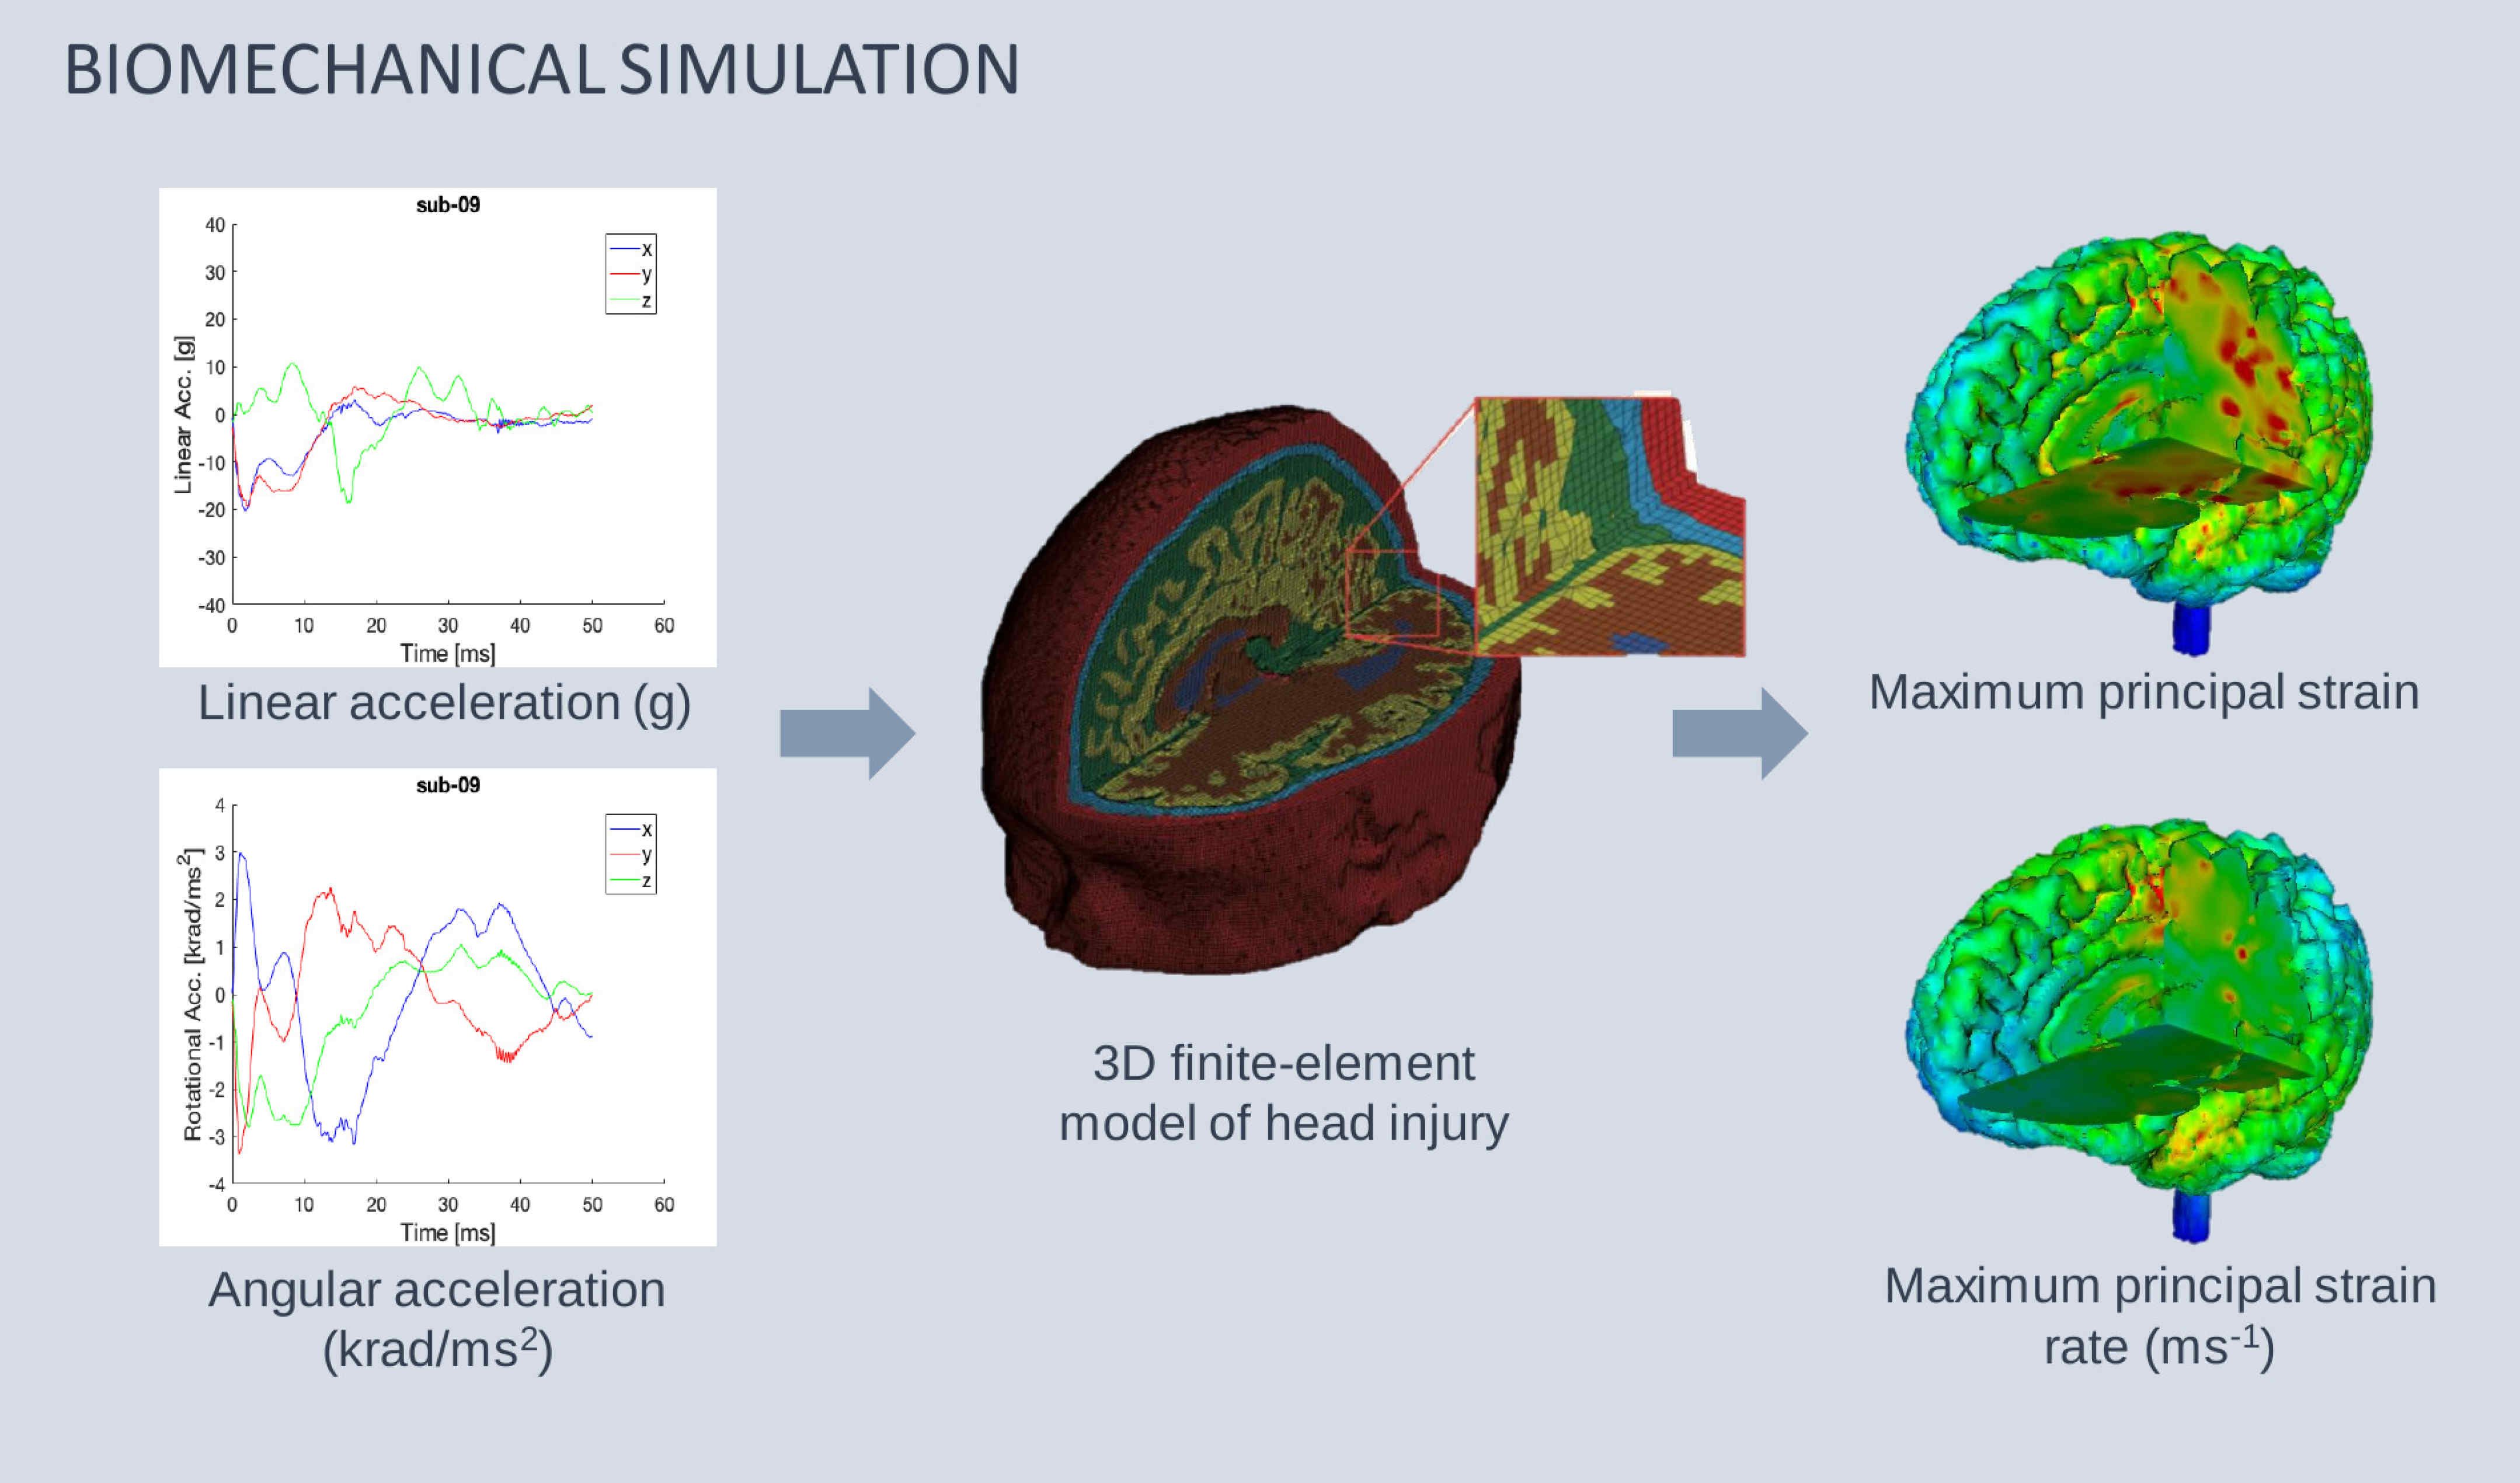 We use Finite Element modelling to see how different linear and angular head acceleration affects the strain on the brain during an impact.